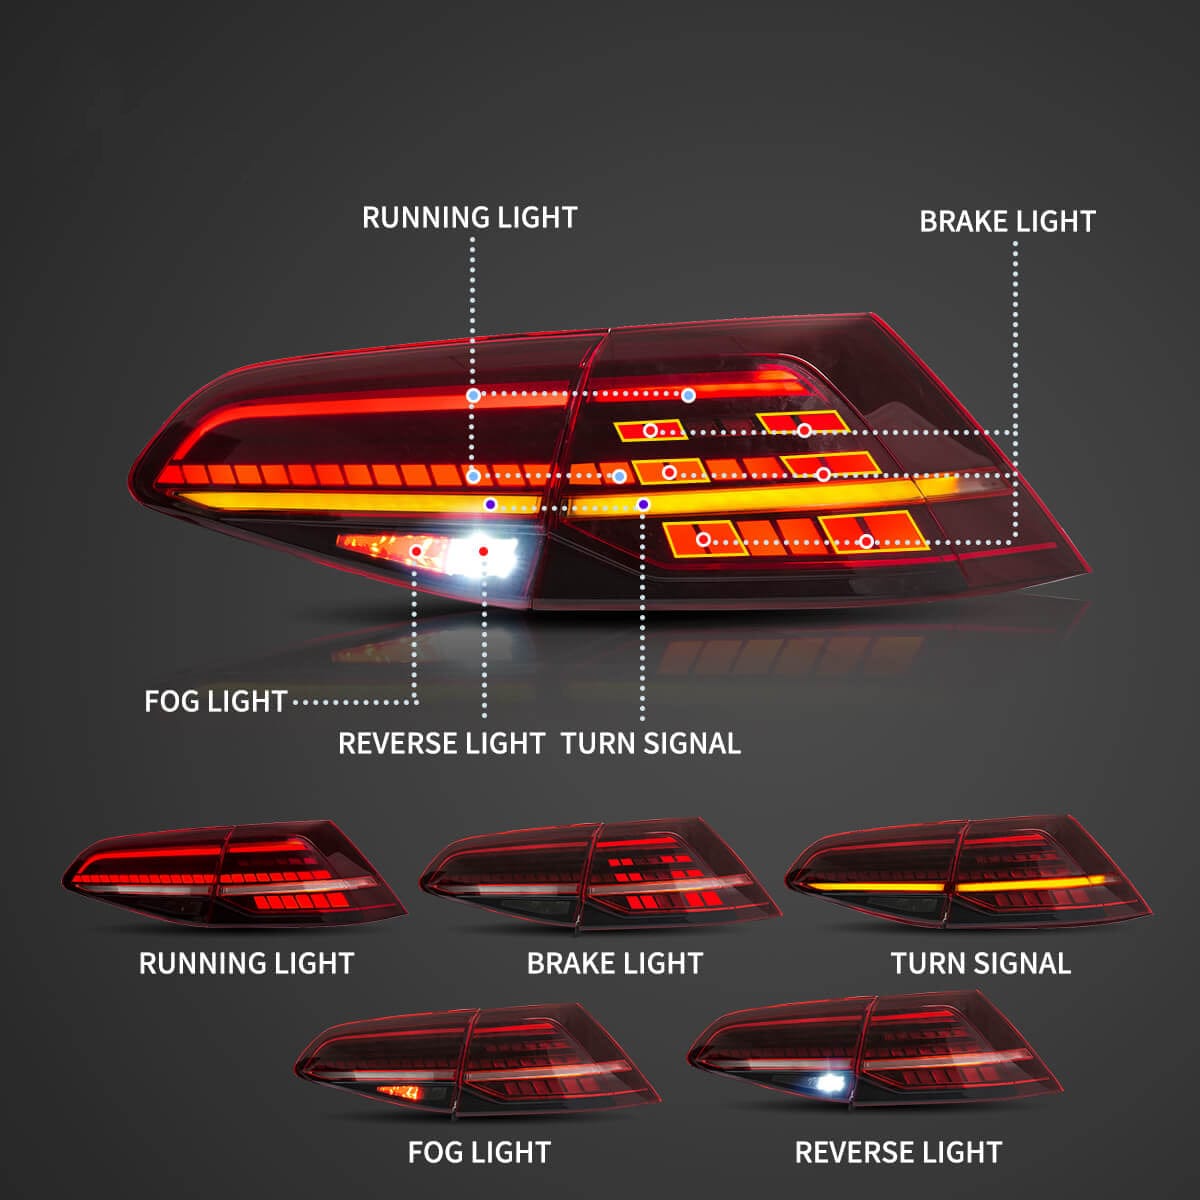 2013-2020 VOLKSWAGEN GOLF MK7 Tail Lights - RGB Halo Kits Multicolor Flow Series Color Chasing RGBWA LED headlight kit Oracle Lighting Trendz OneUpLighting Morimoto theretrofitsource AutoLEDTech Diode Dynamics